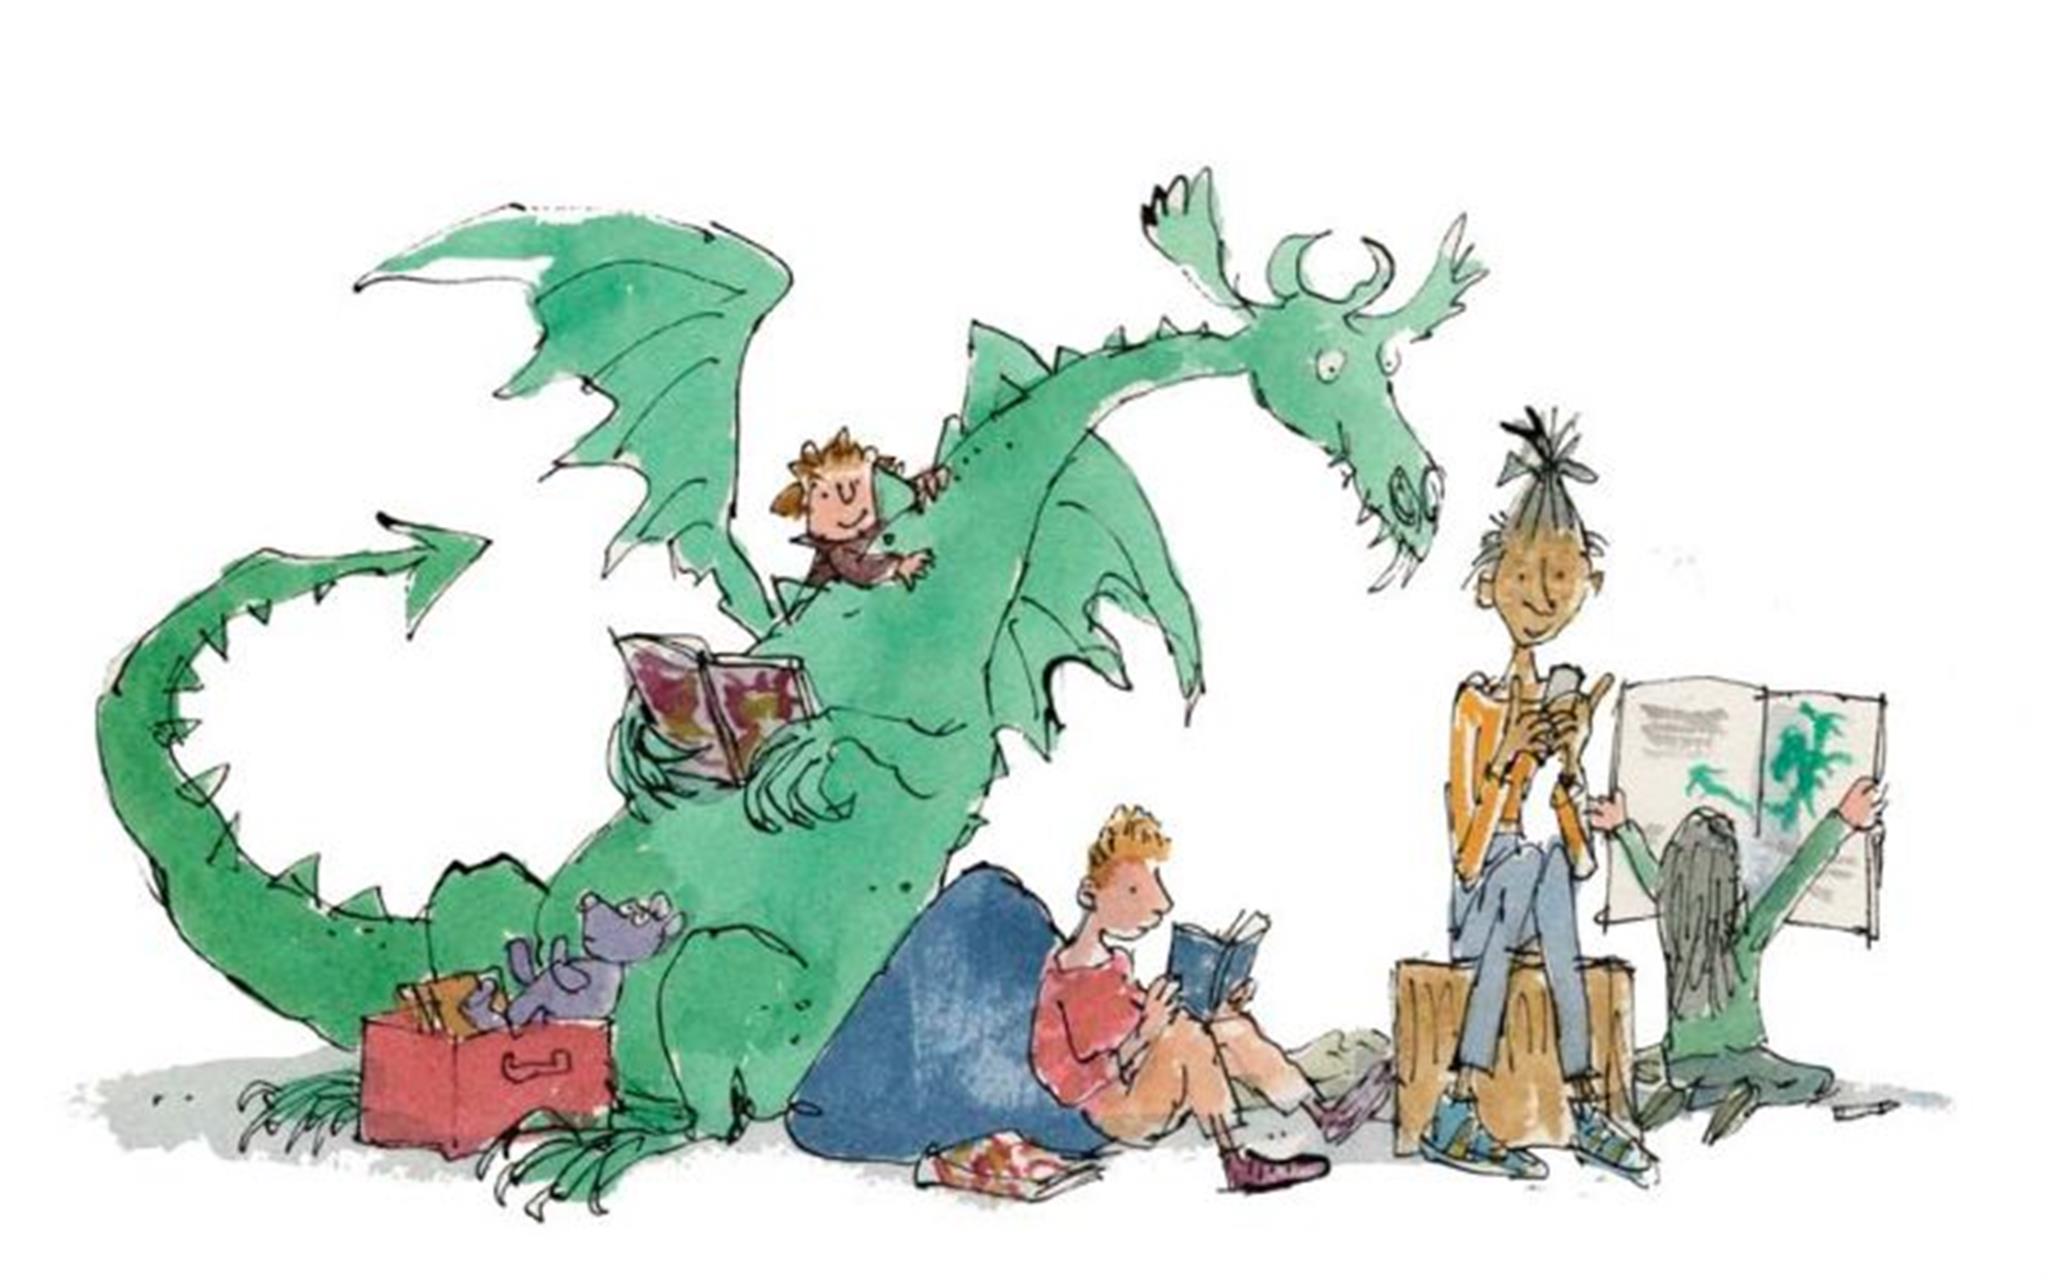 Quentin Blake: The Illustrated Hospital image